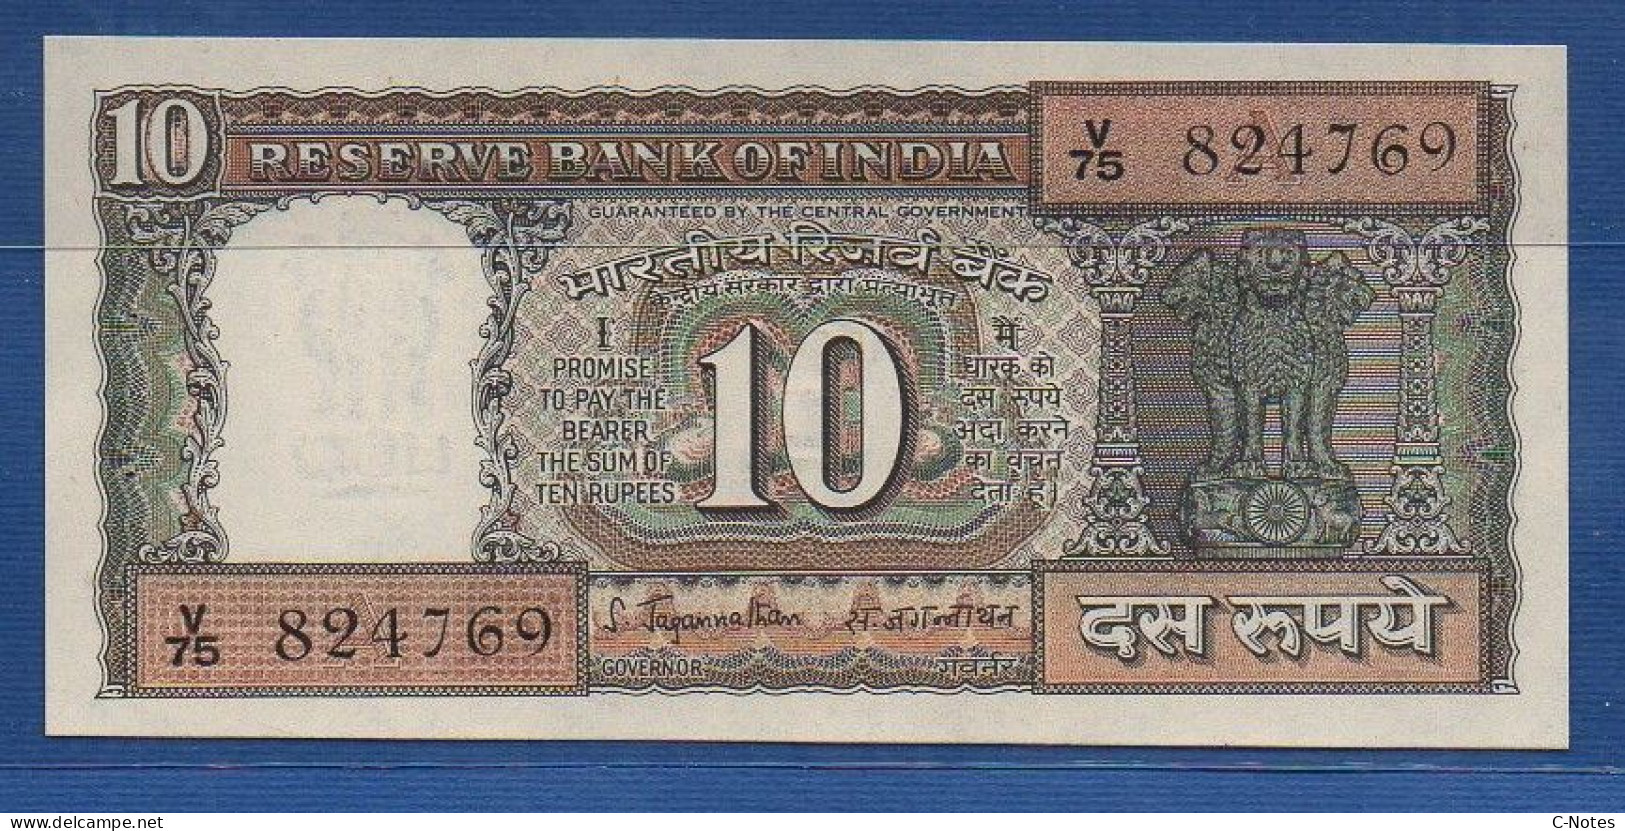 INDIA - P. 60a – 10 Rupees ND, UNC-,  Serie V75 824769 - Plate Letter A Signature: S. Jagannathan (1970) - Indien